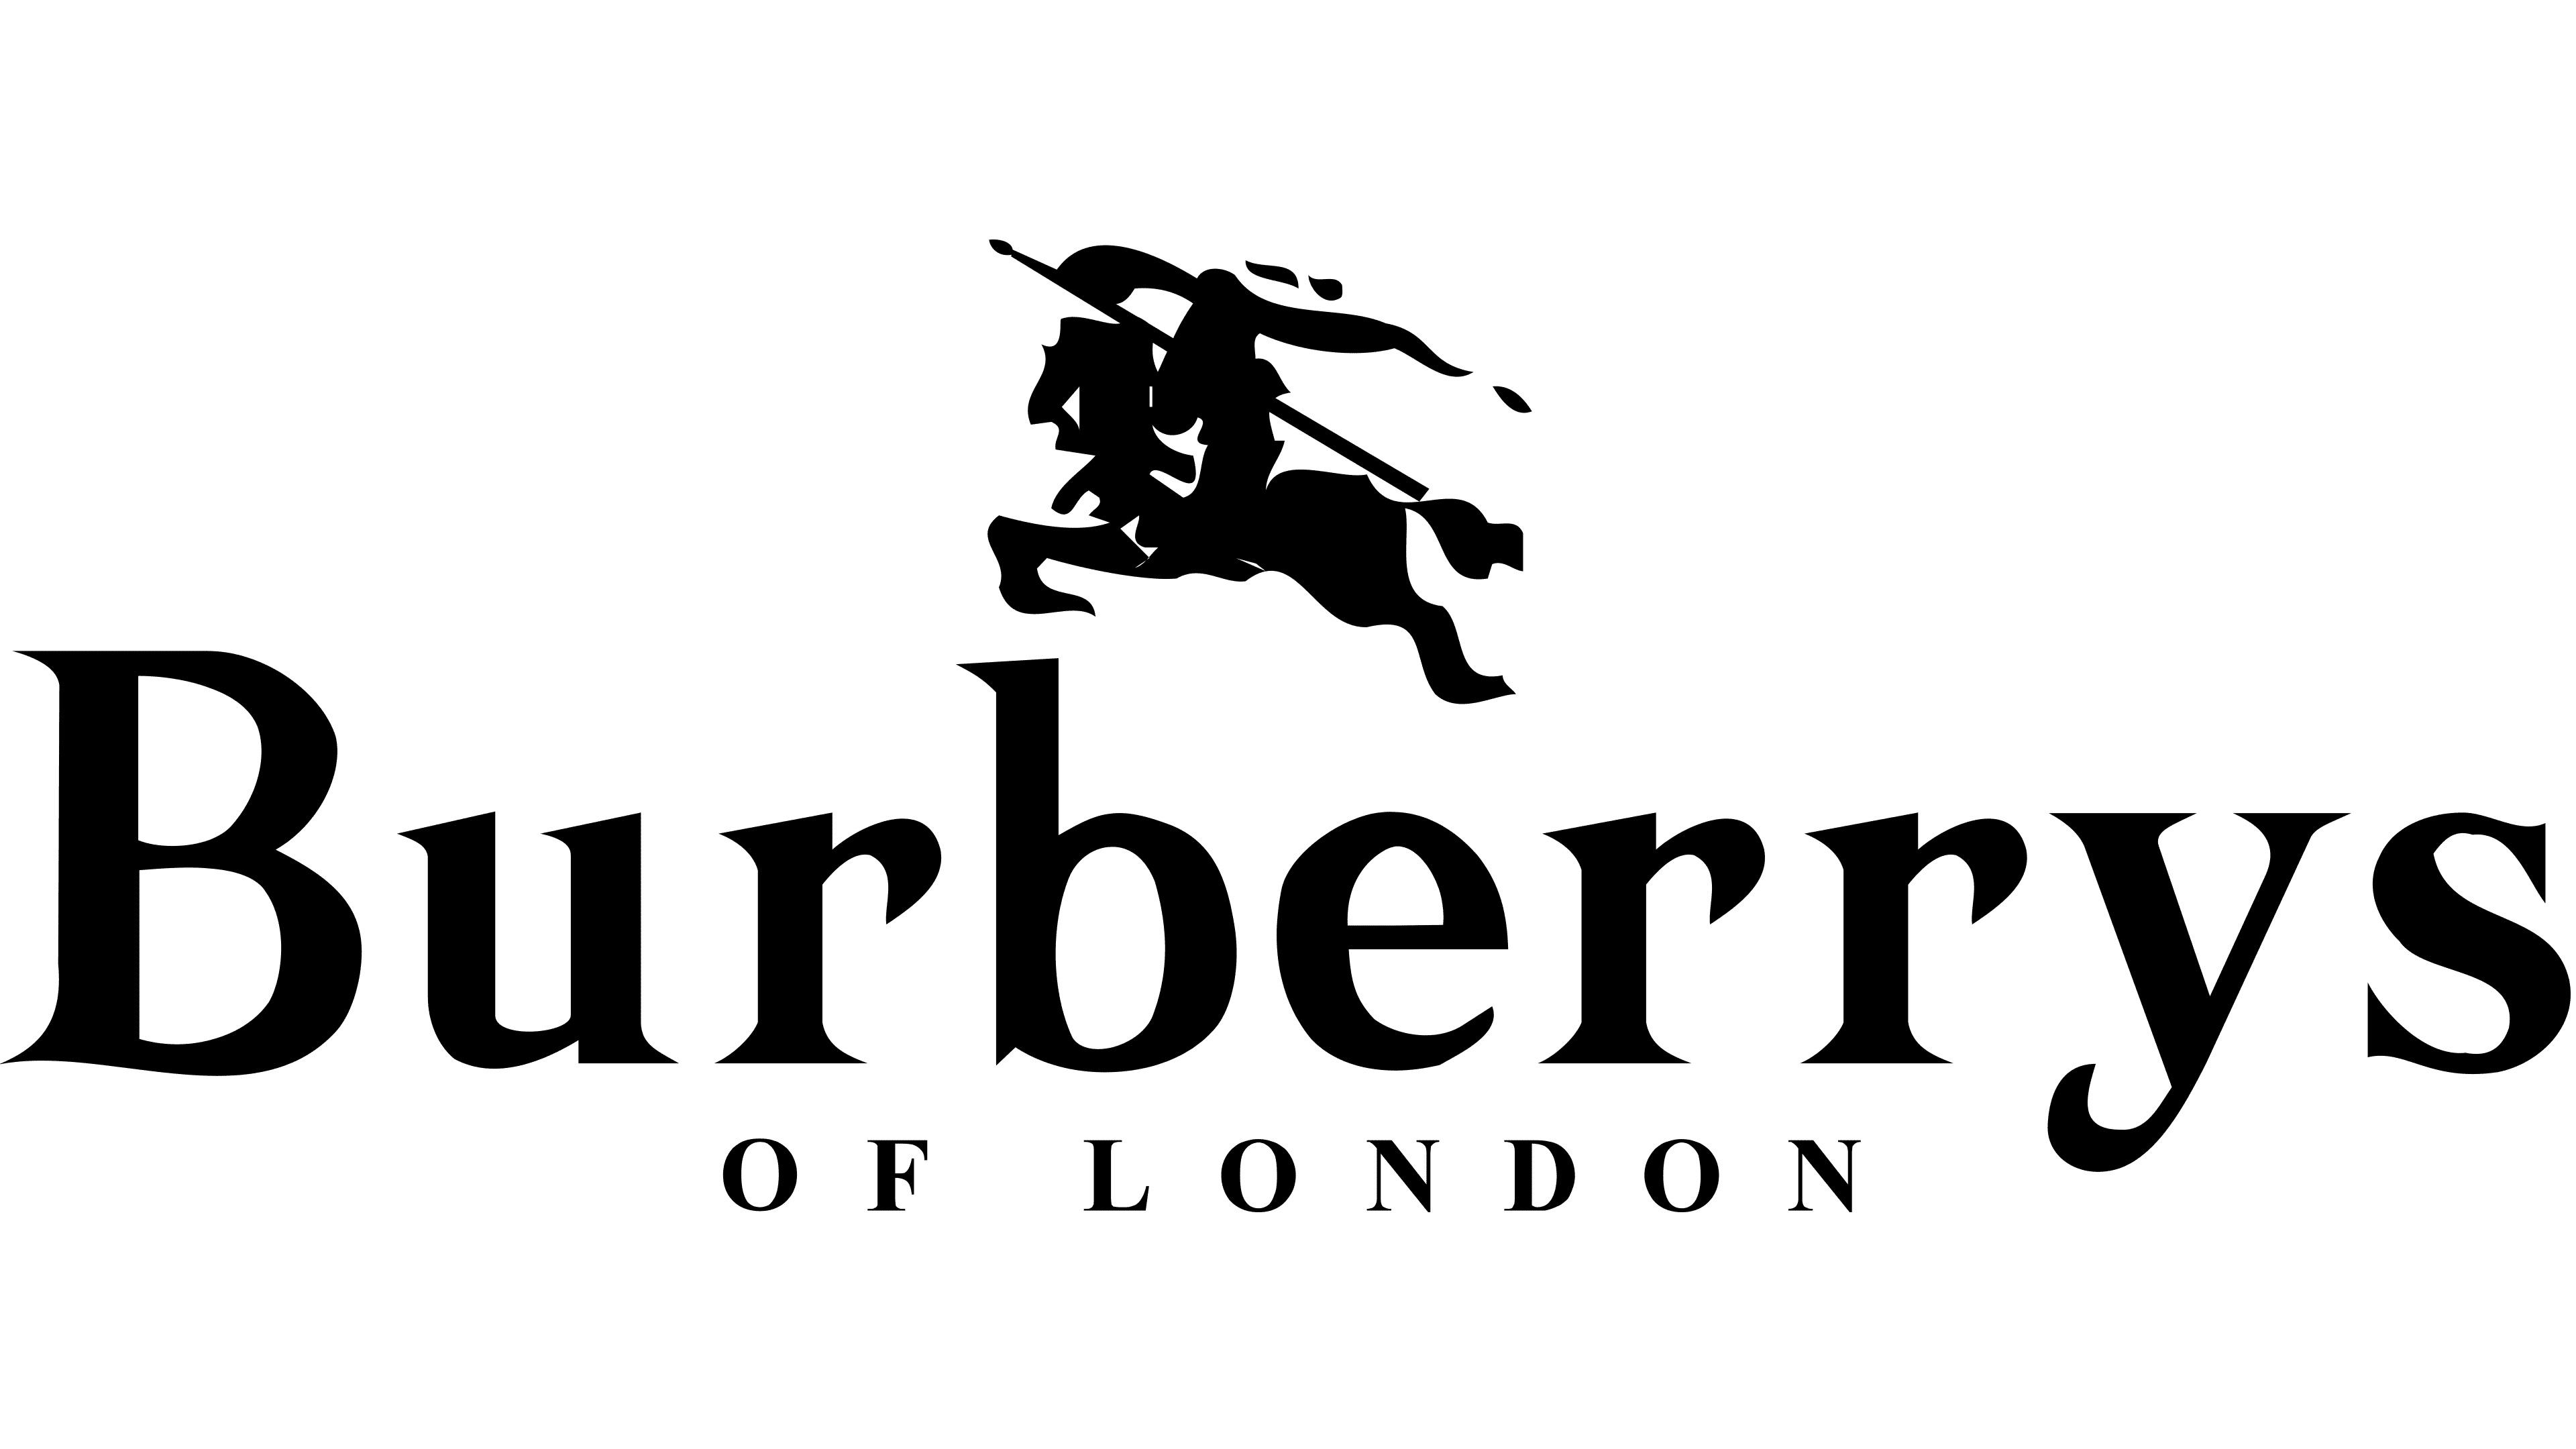 Burberry: One of the most iconic fashion brands in the world, Logo evolution, 1968-1999. 3840x2160 4K Background.